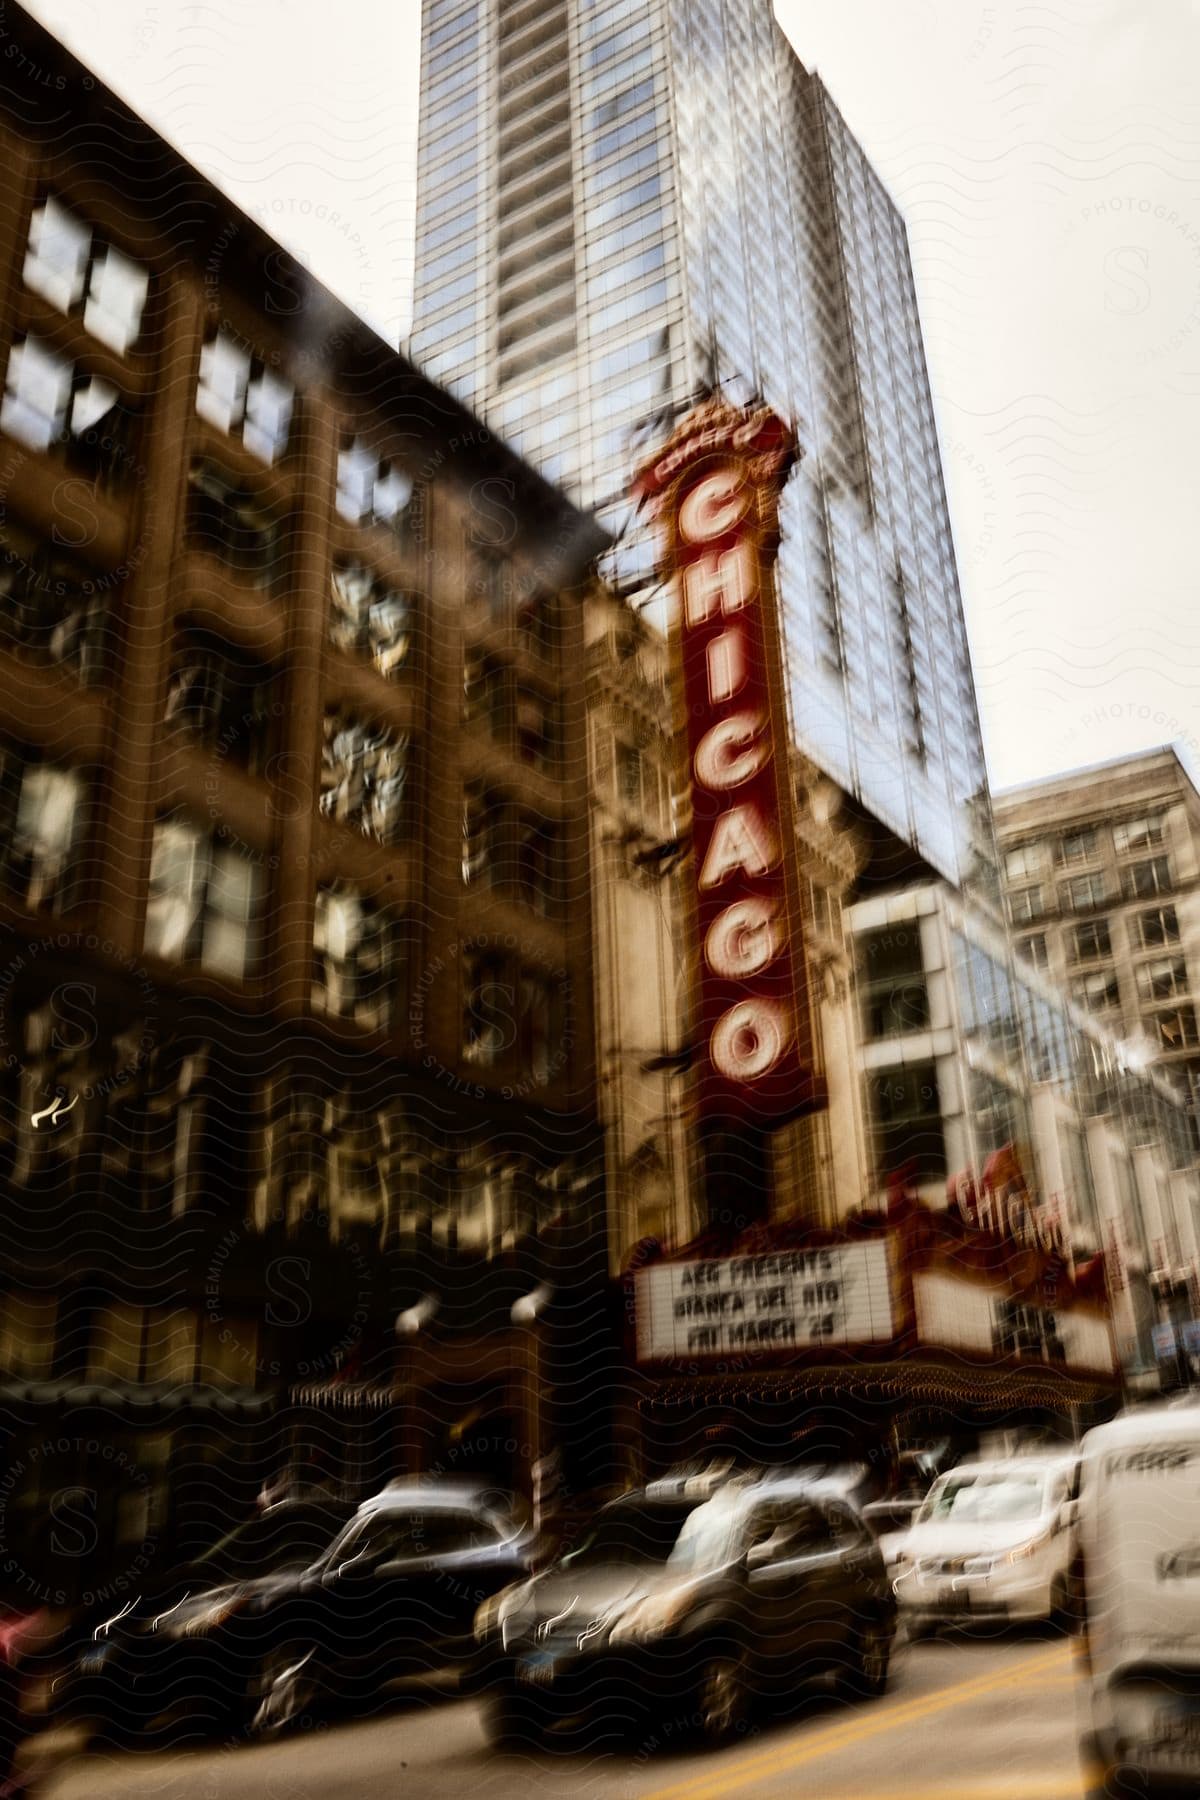 Chicago Theater on a busy street with vehicle traffic and tall buildings.